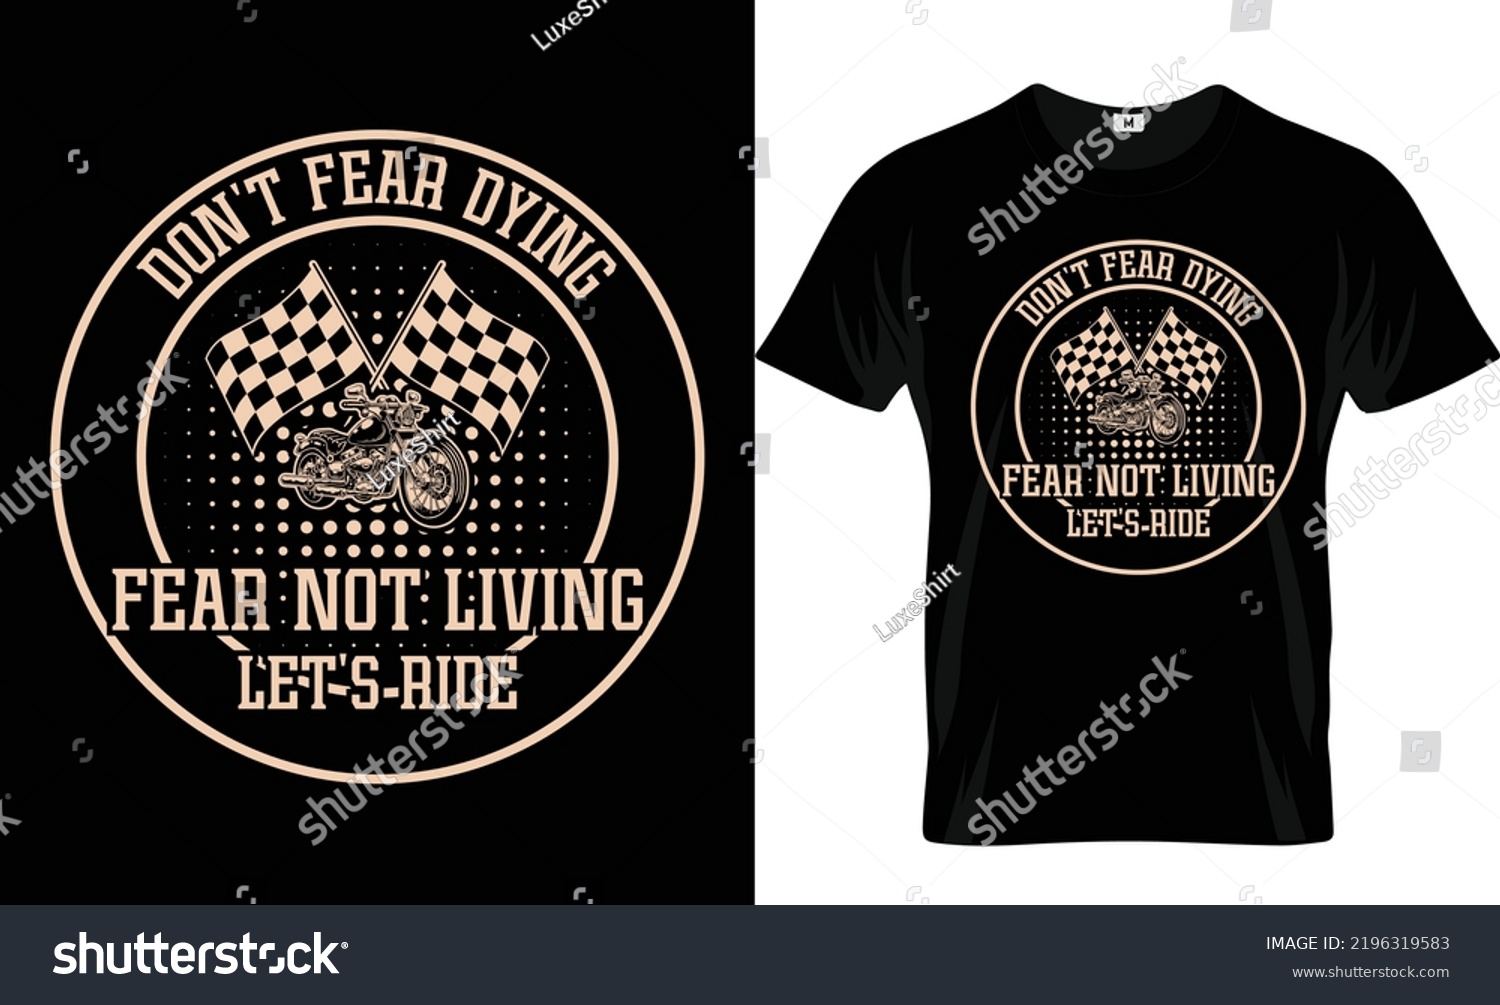 SVG of Motorcycle T Shirt Design For Your POD Business svg